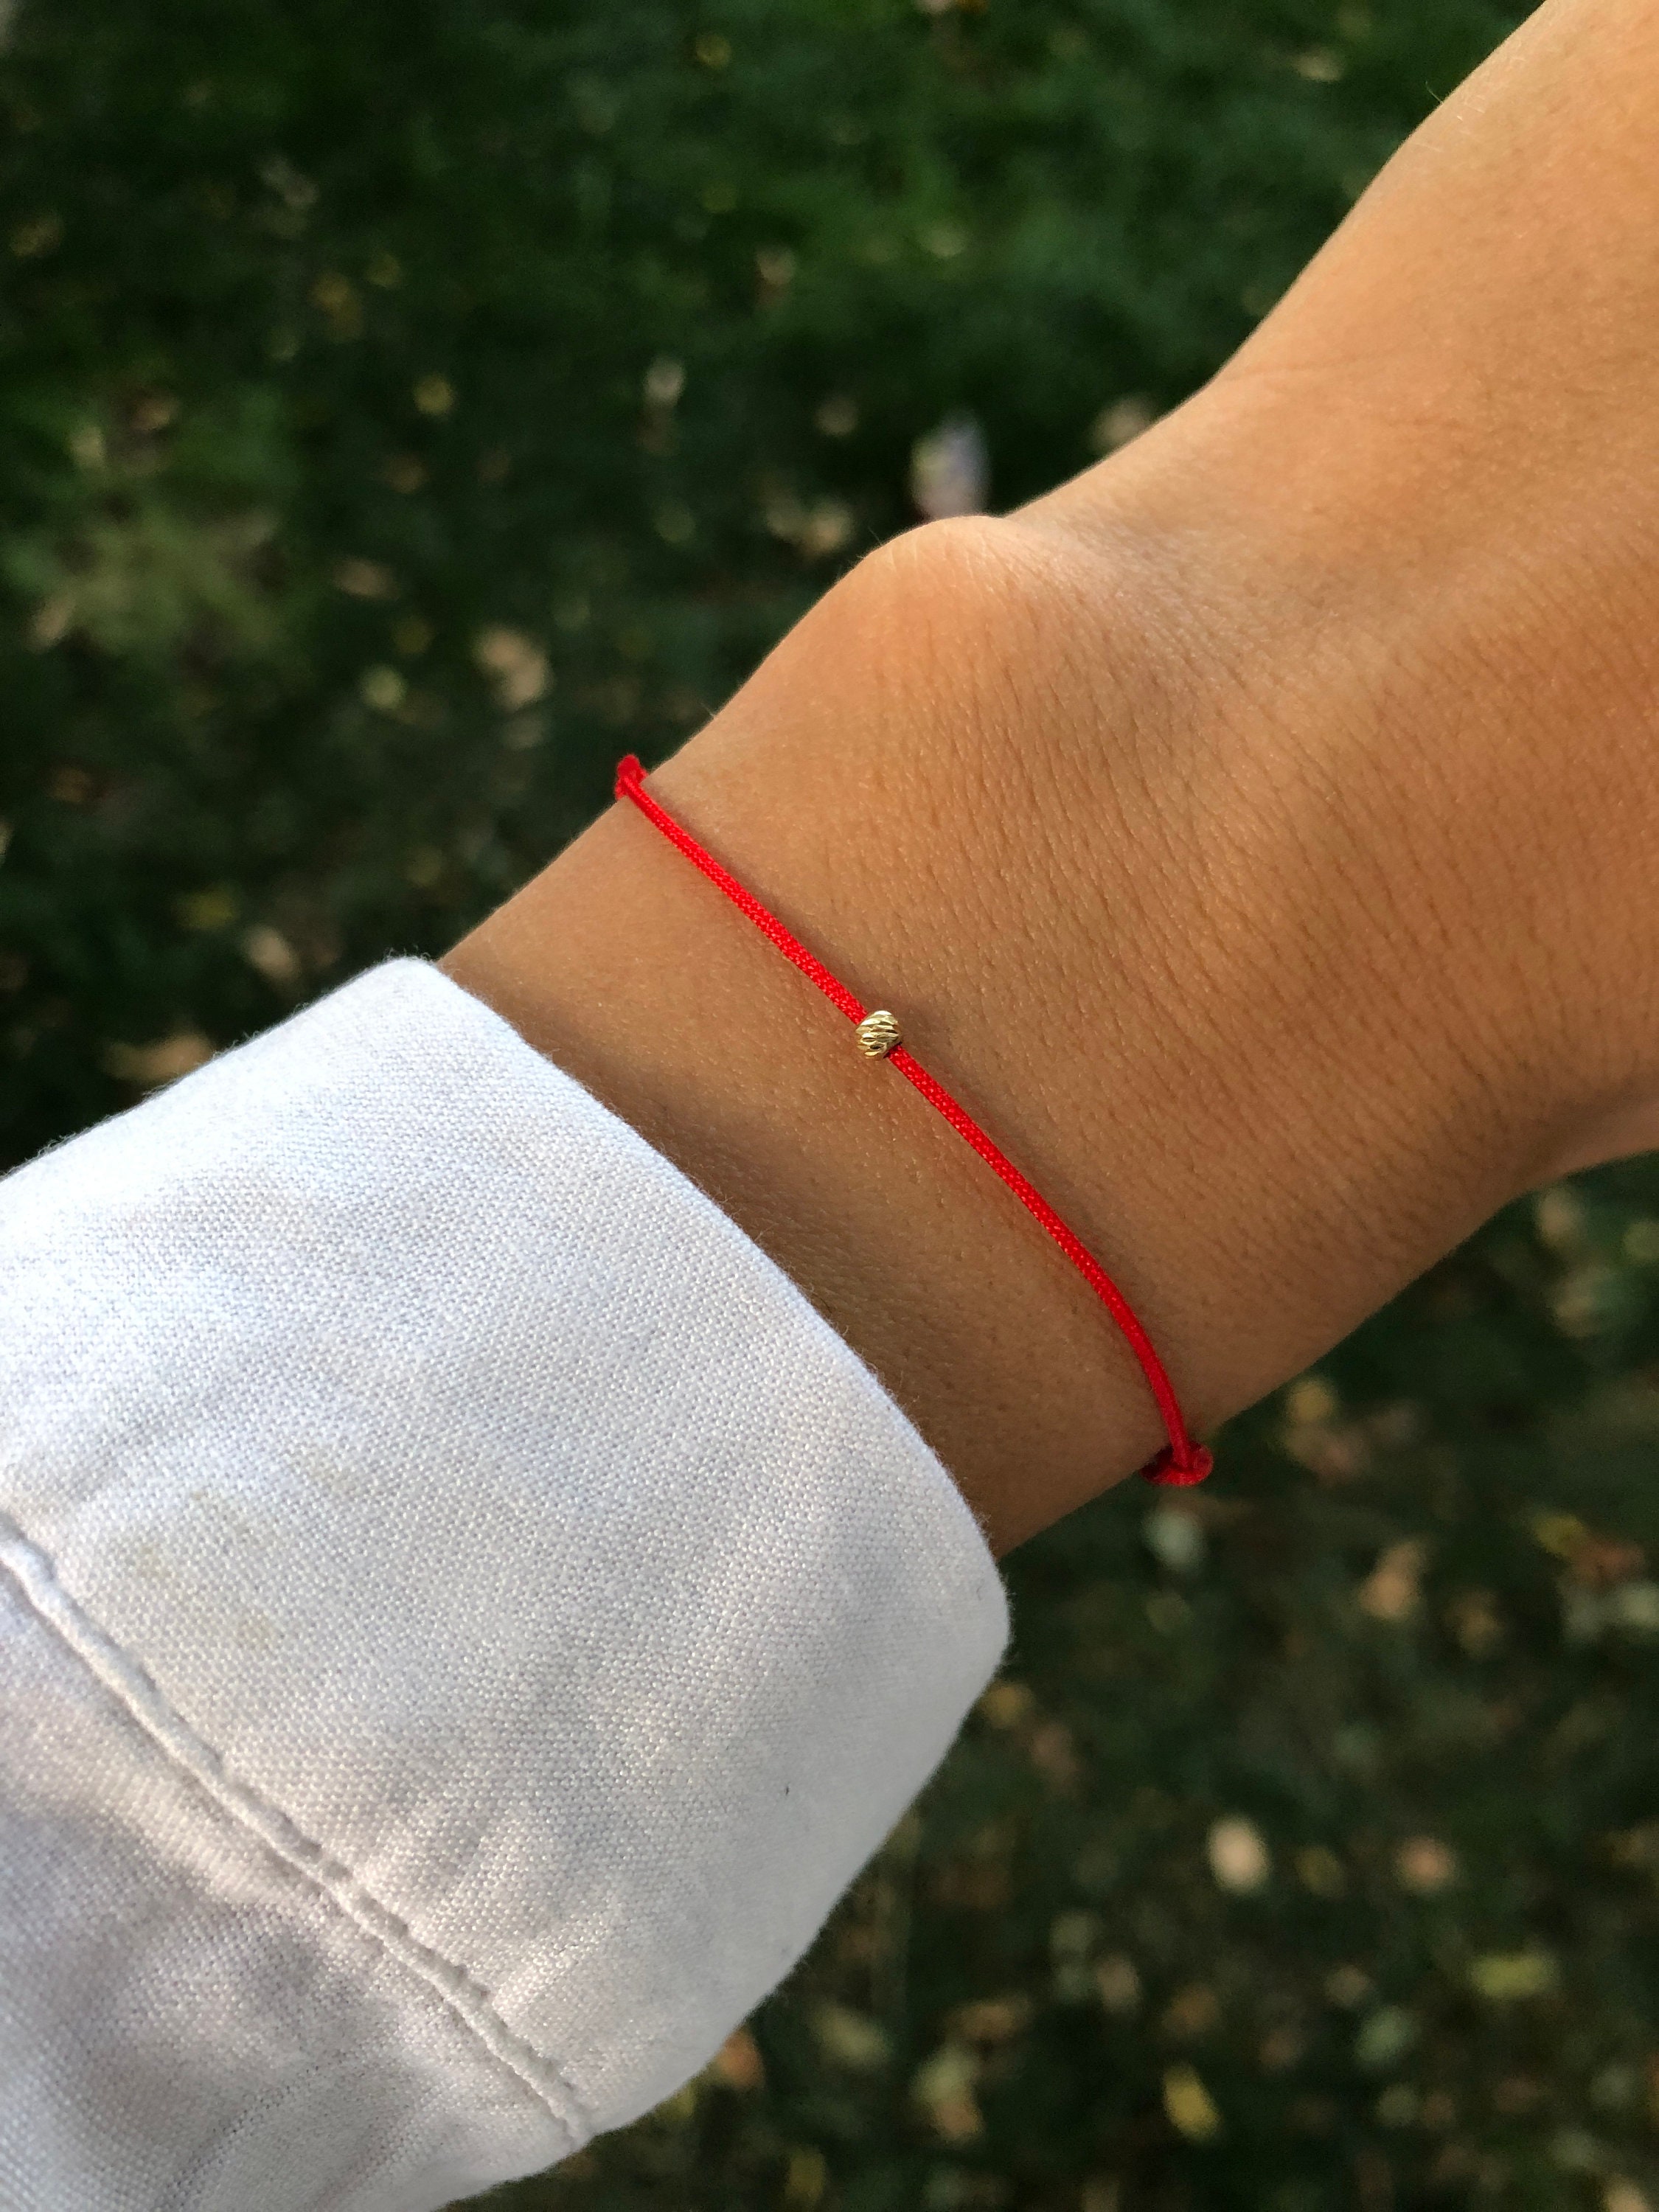 Red String Bracelet and Why Wear a String as Jewelry? – Alef Bet, Red  String Bracelet - valleyresorts.co.uk